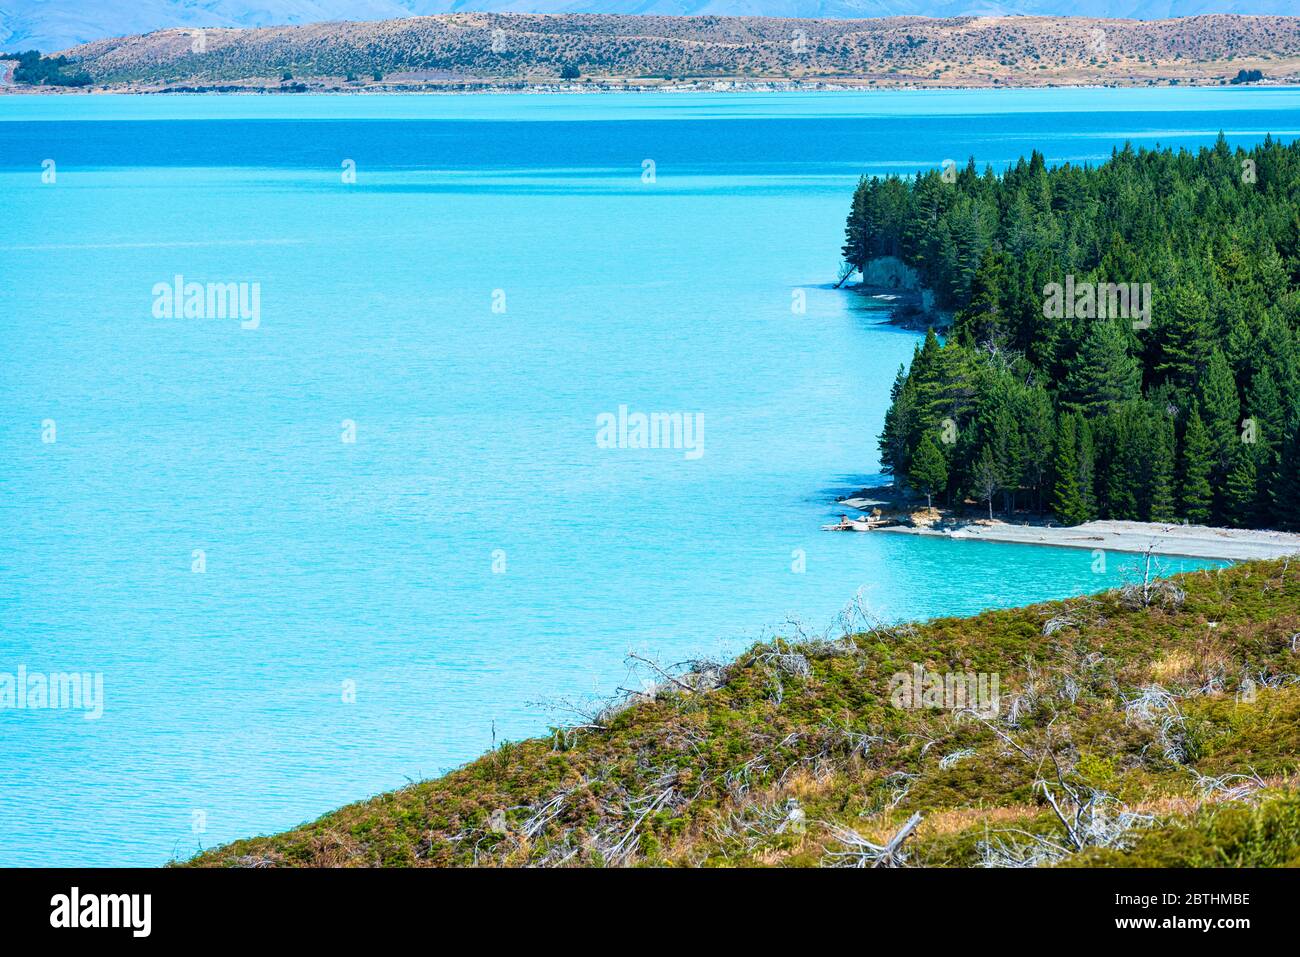 Lake Pukaki, a glacial / alpine lake on the edge of the Mount Cook National Park in the region of Canterbury, New Zealand Stock Photo